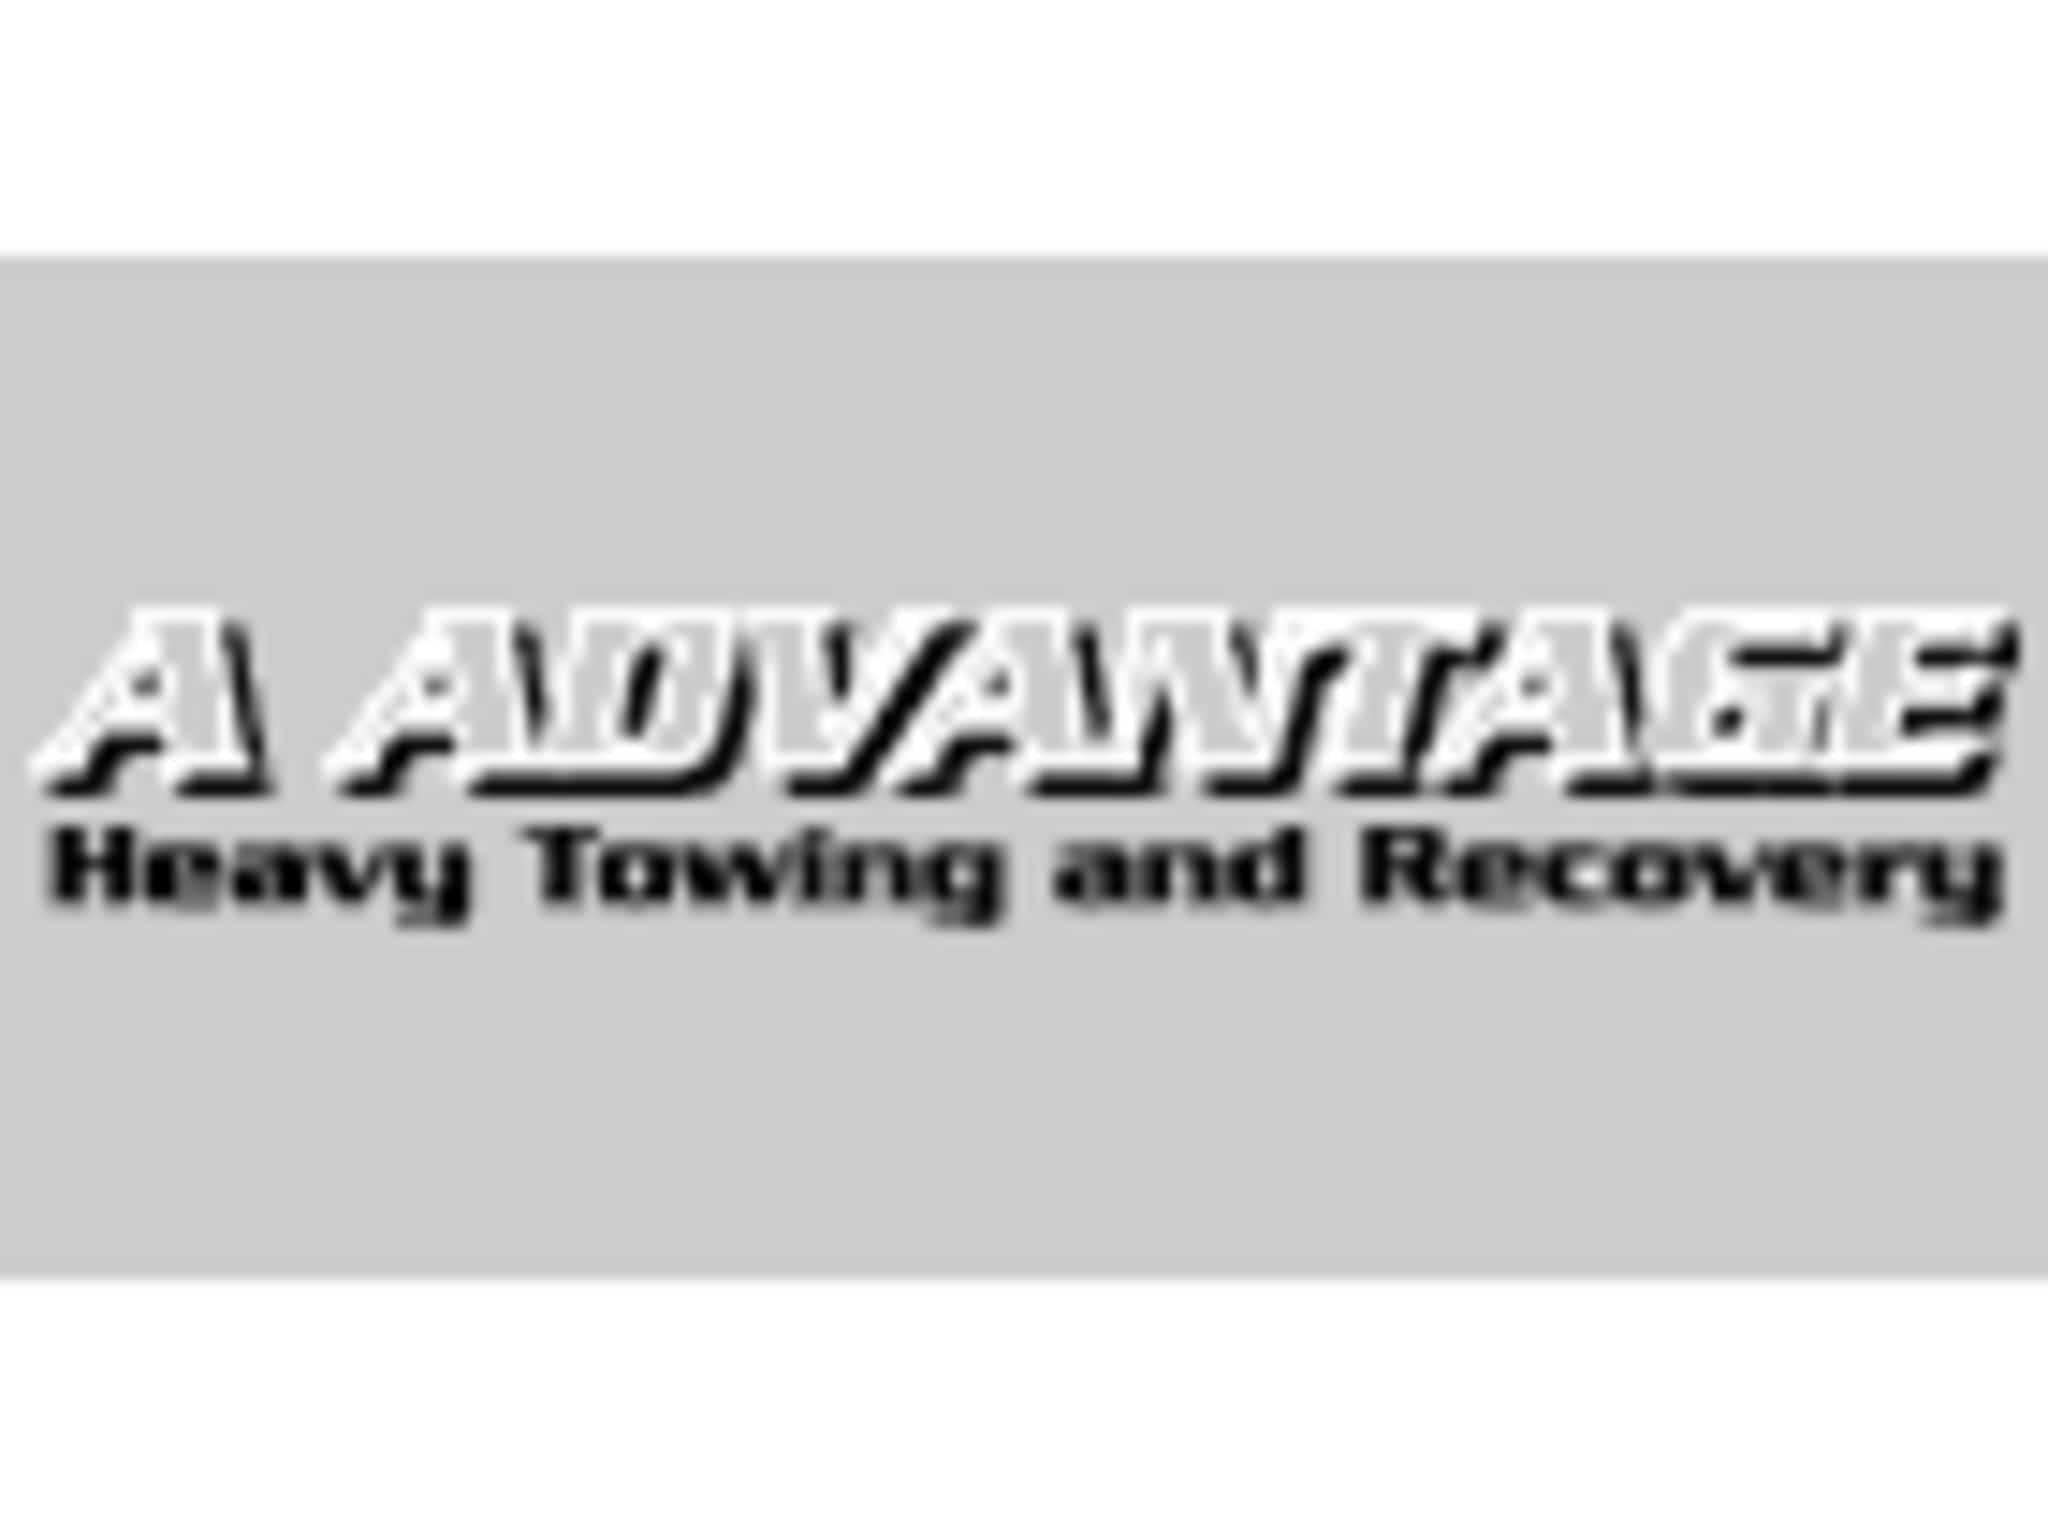 photo A Advantage Heavy Towing and Recovery